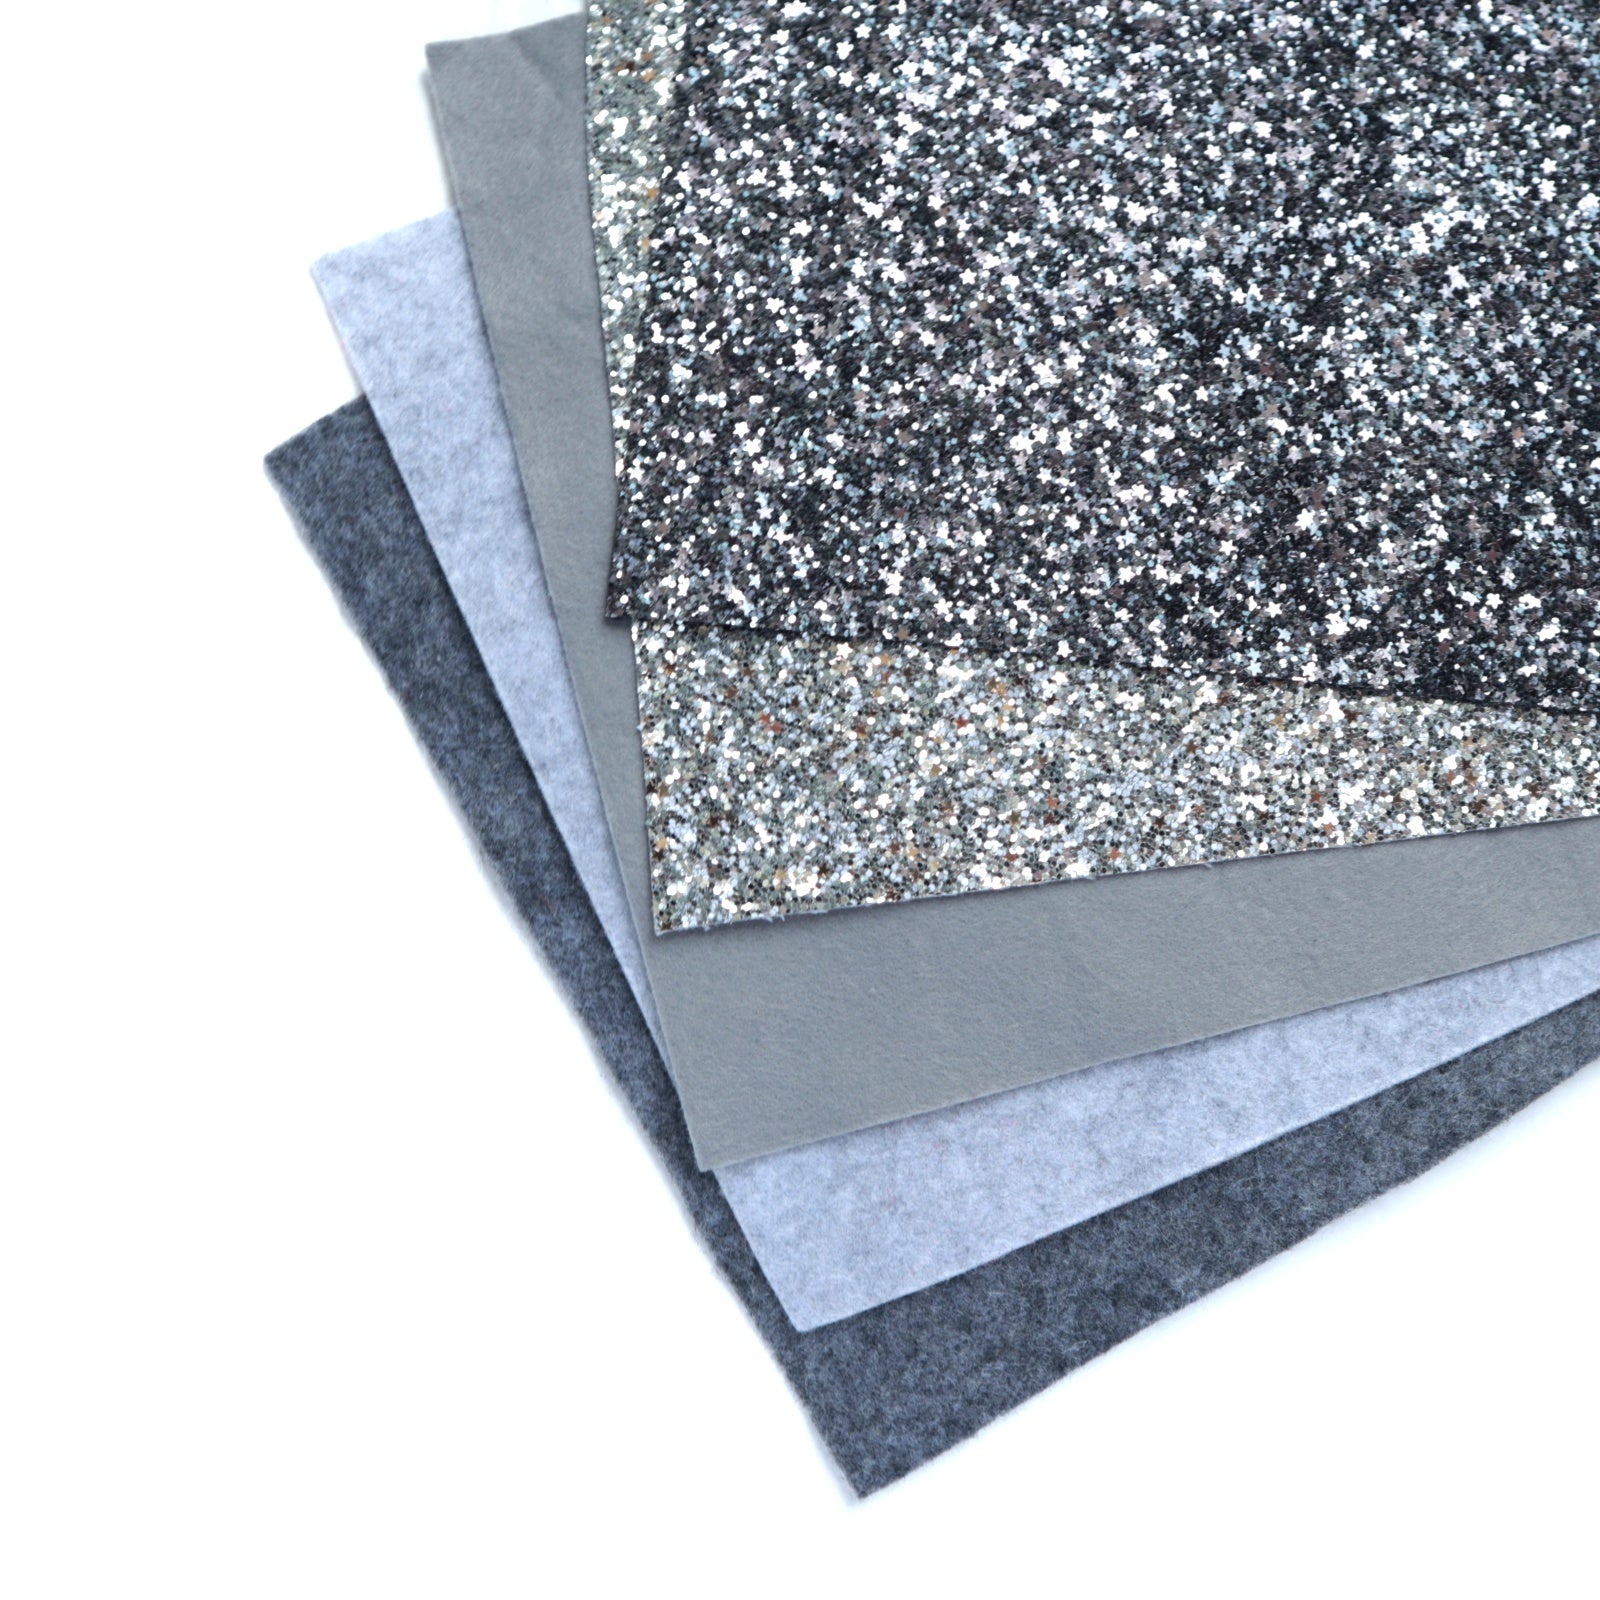 SILVER SYNTHETIC LEATHER FAUX LEATHER FABRIC AND FELT 20X30 CM 5 PCS SET - Luxy Kraft